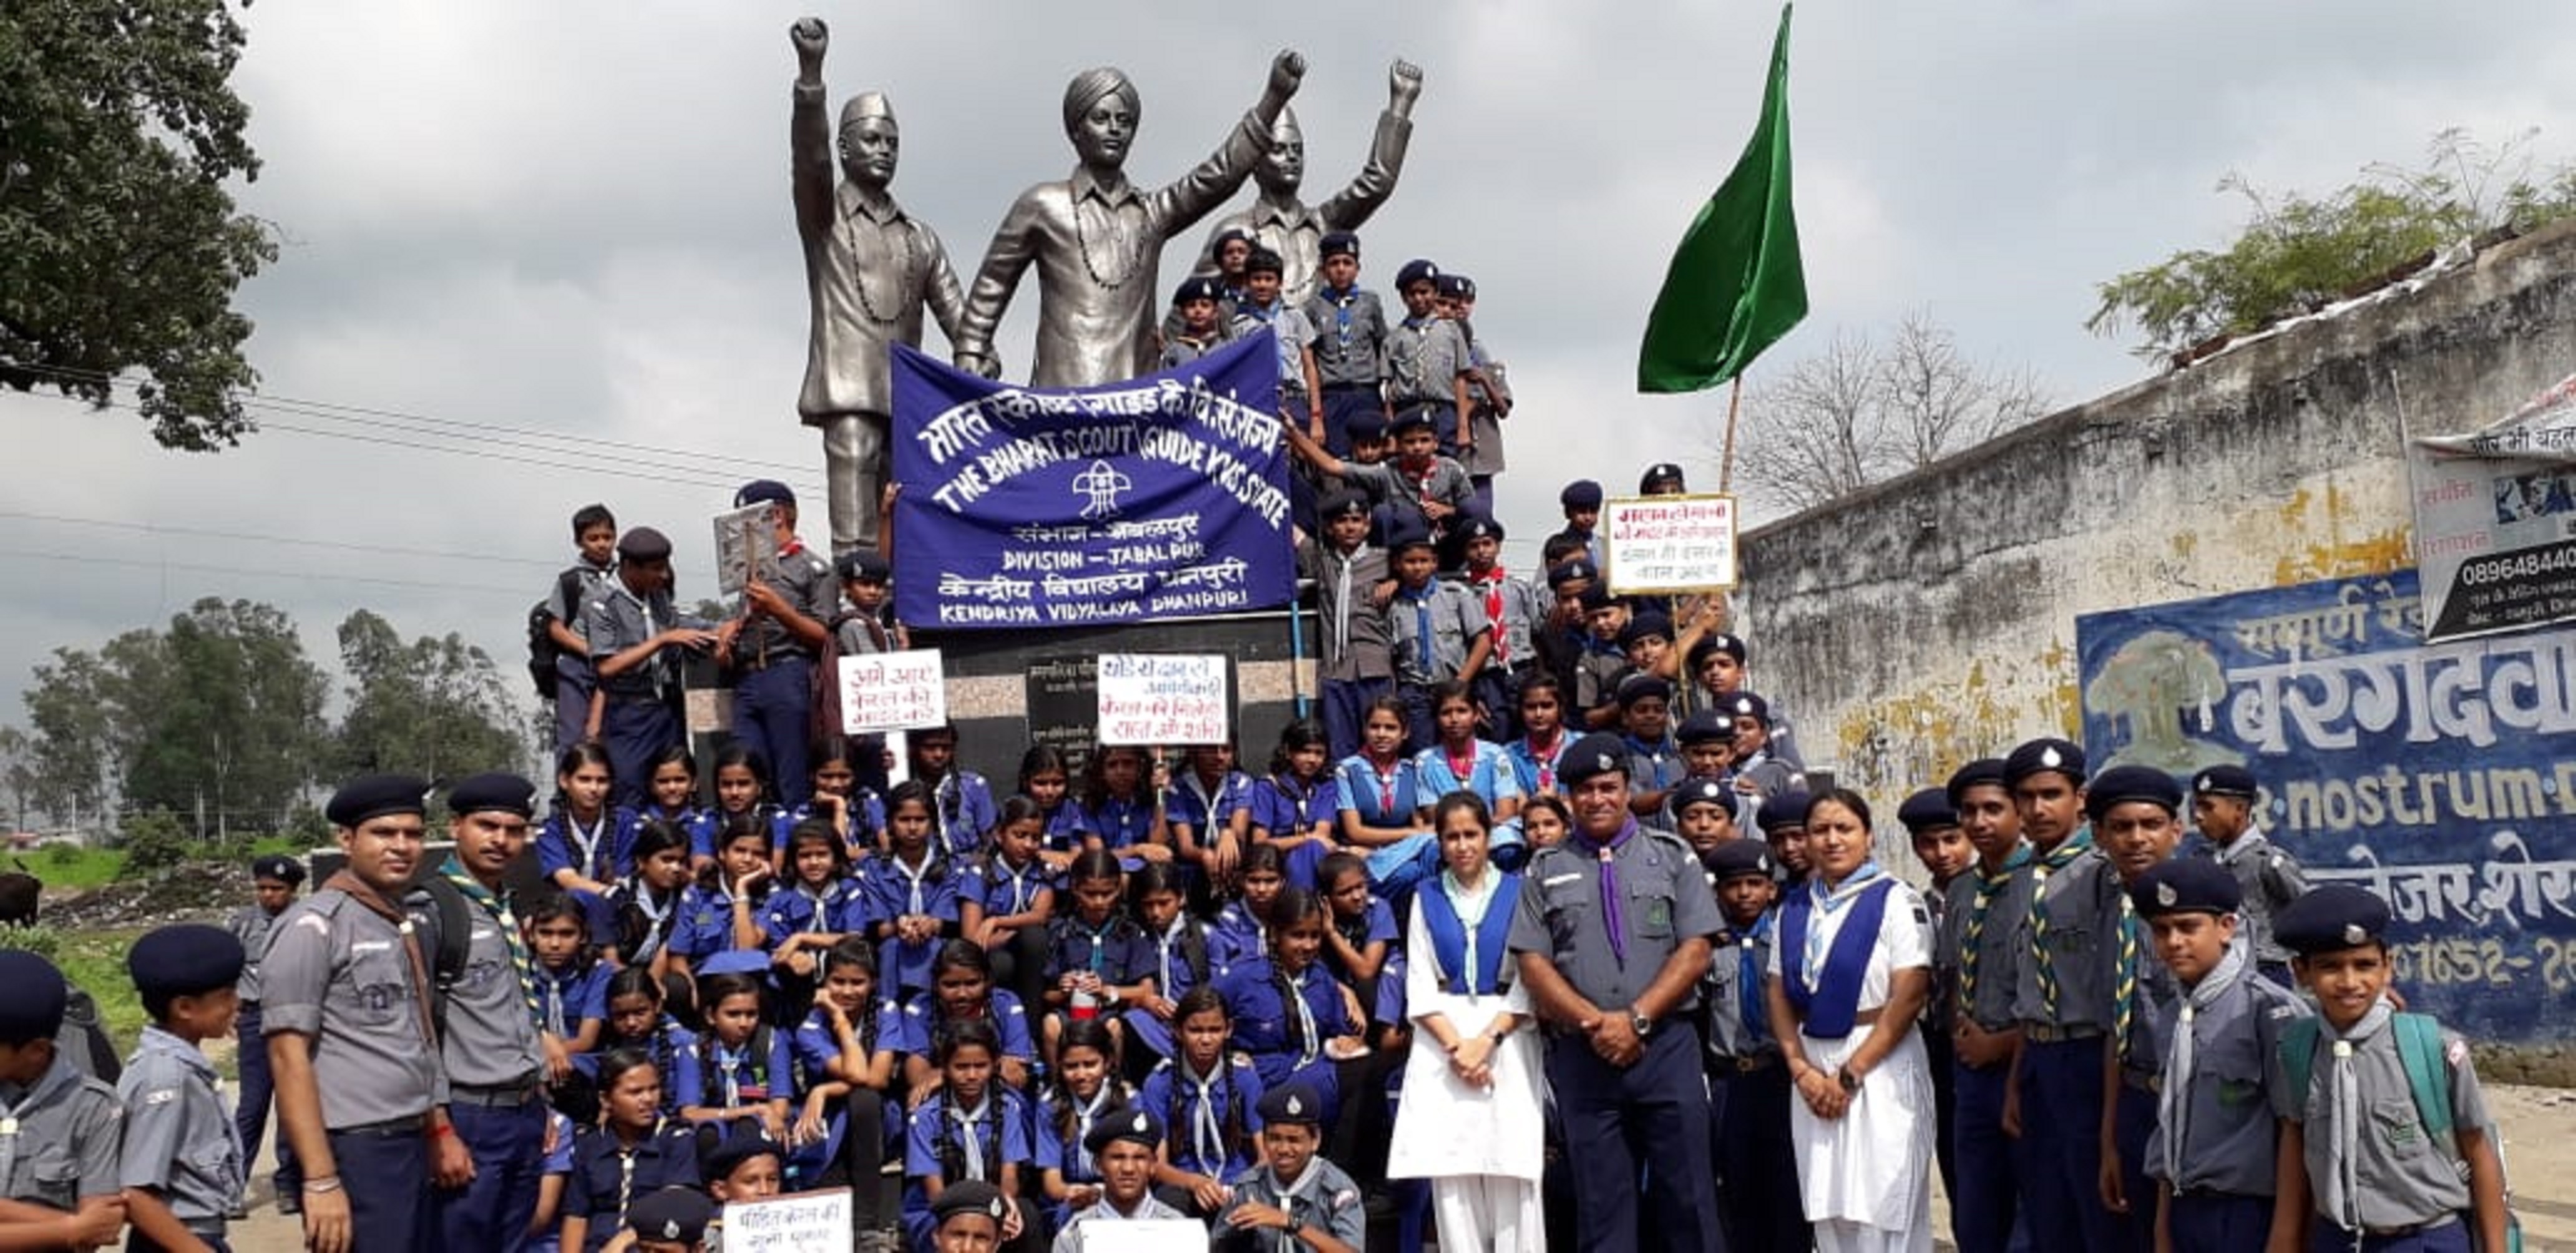 Scout students rally rally in city, relief fund raised for Kerala flood victims